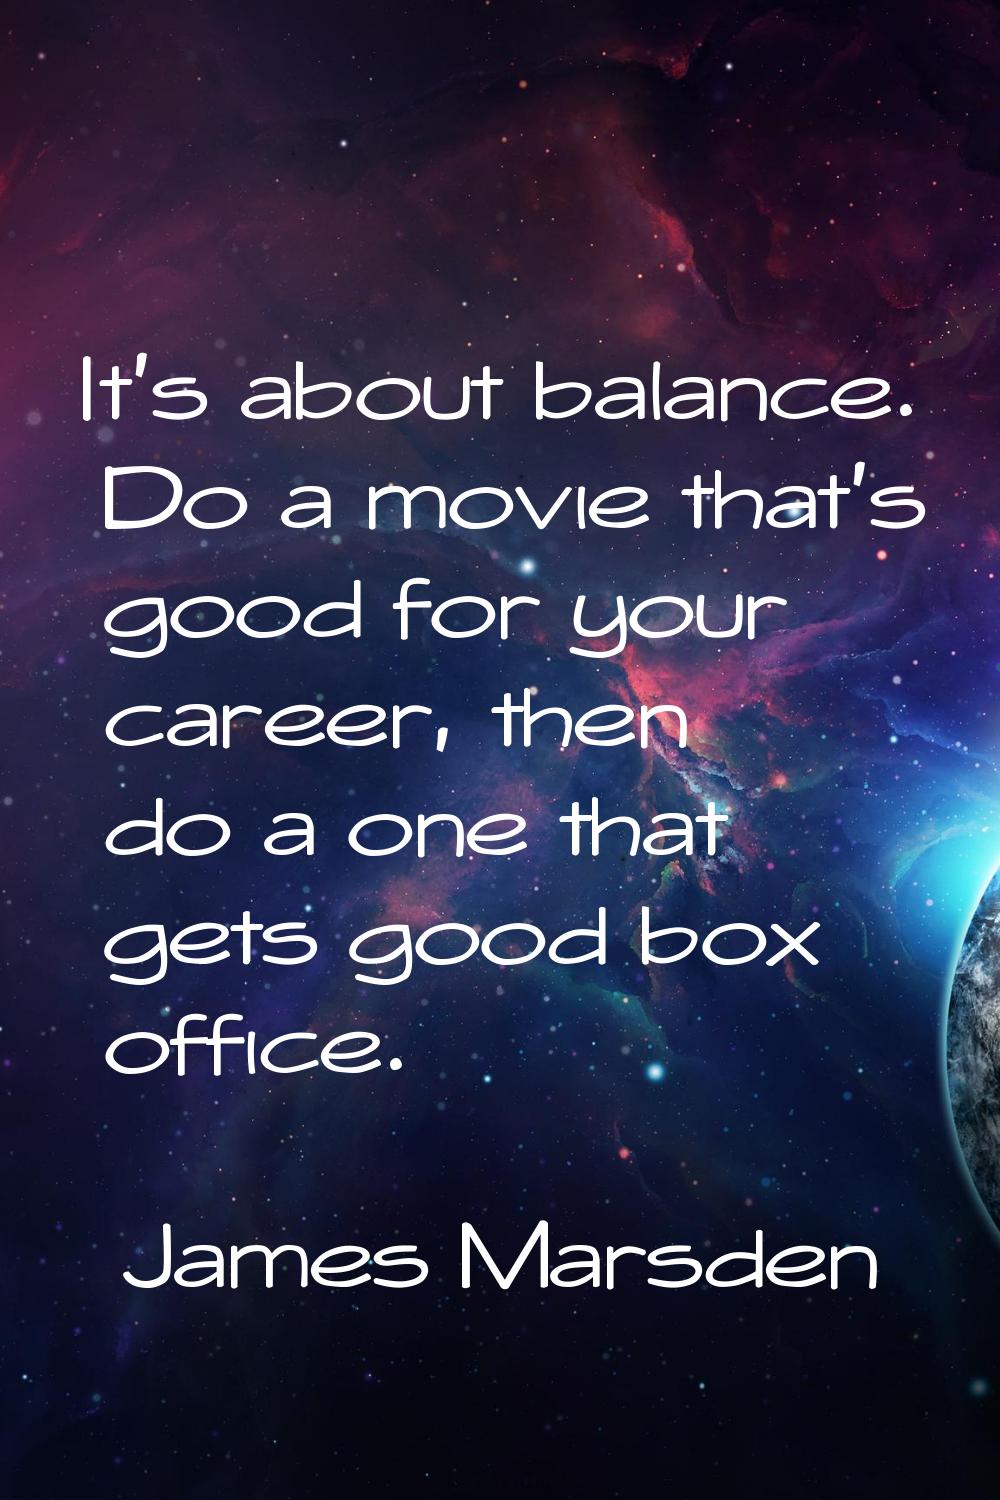 It's about balance. Do a movie that's good for your career, then do a one that gets good box office